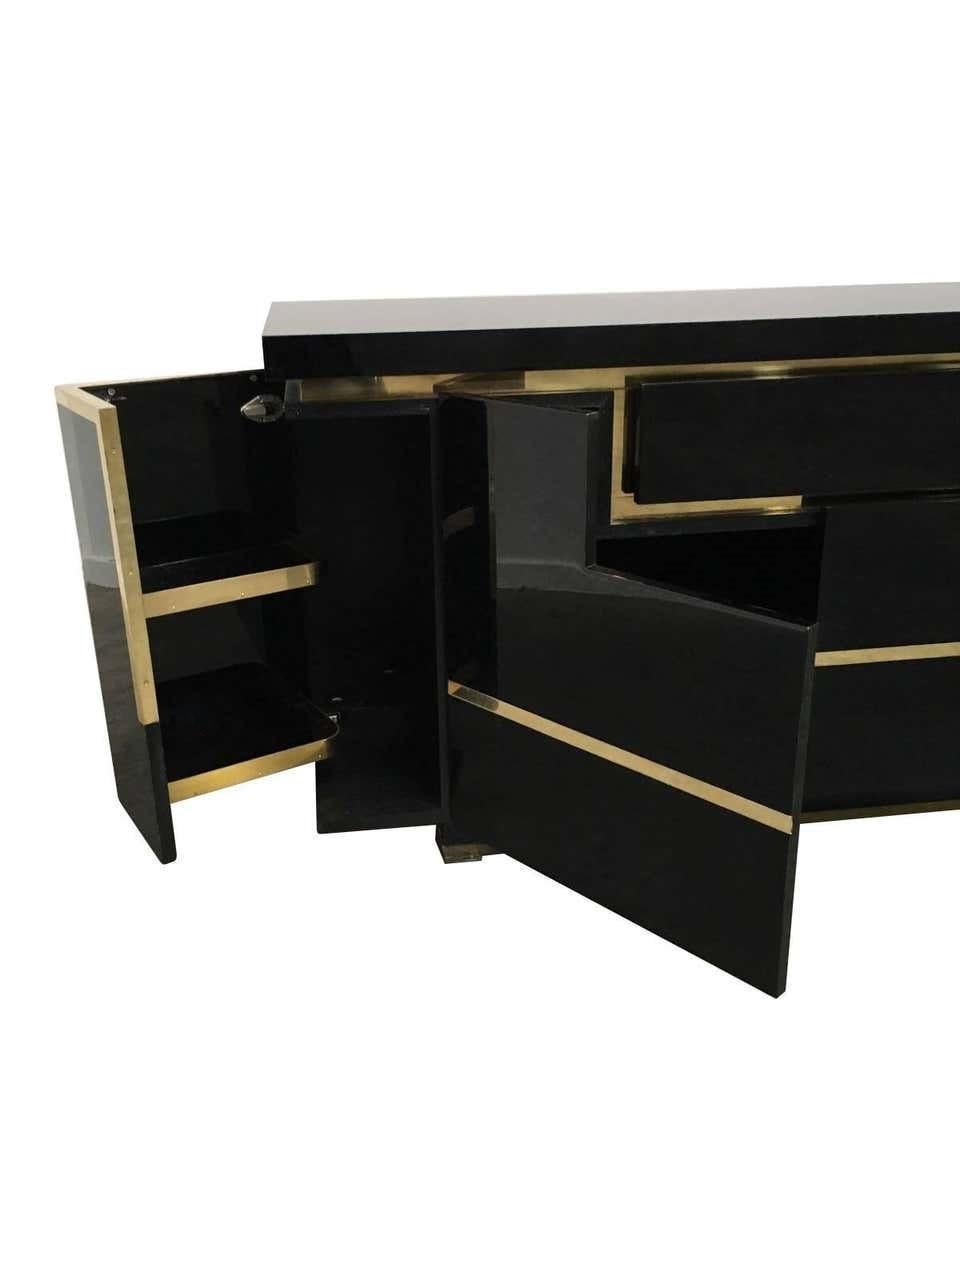 French Black Lacquered Sideboard / Credenza with Brass Trim by Jean Claude Mahey